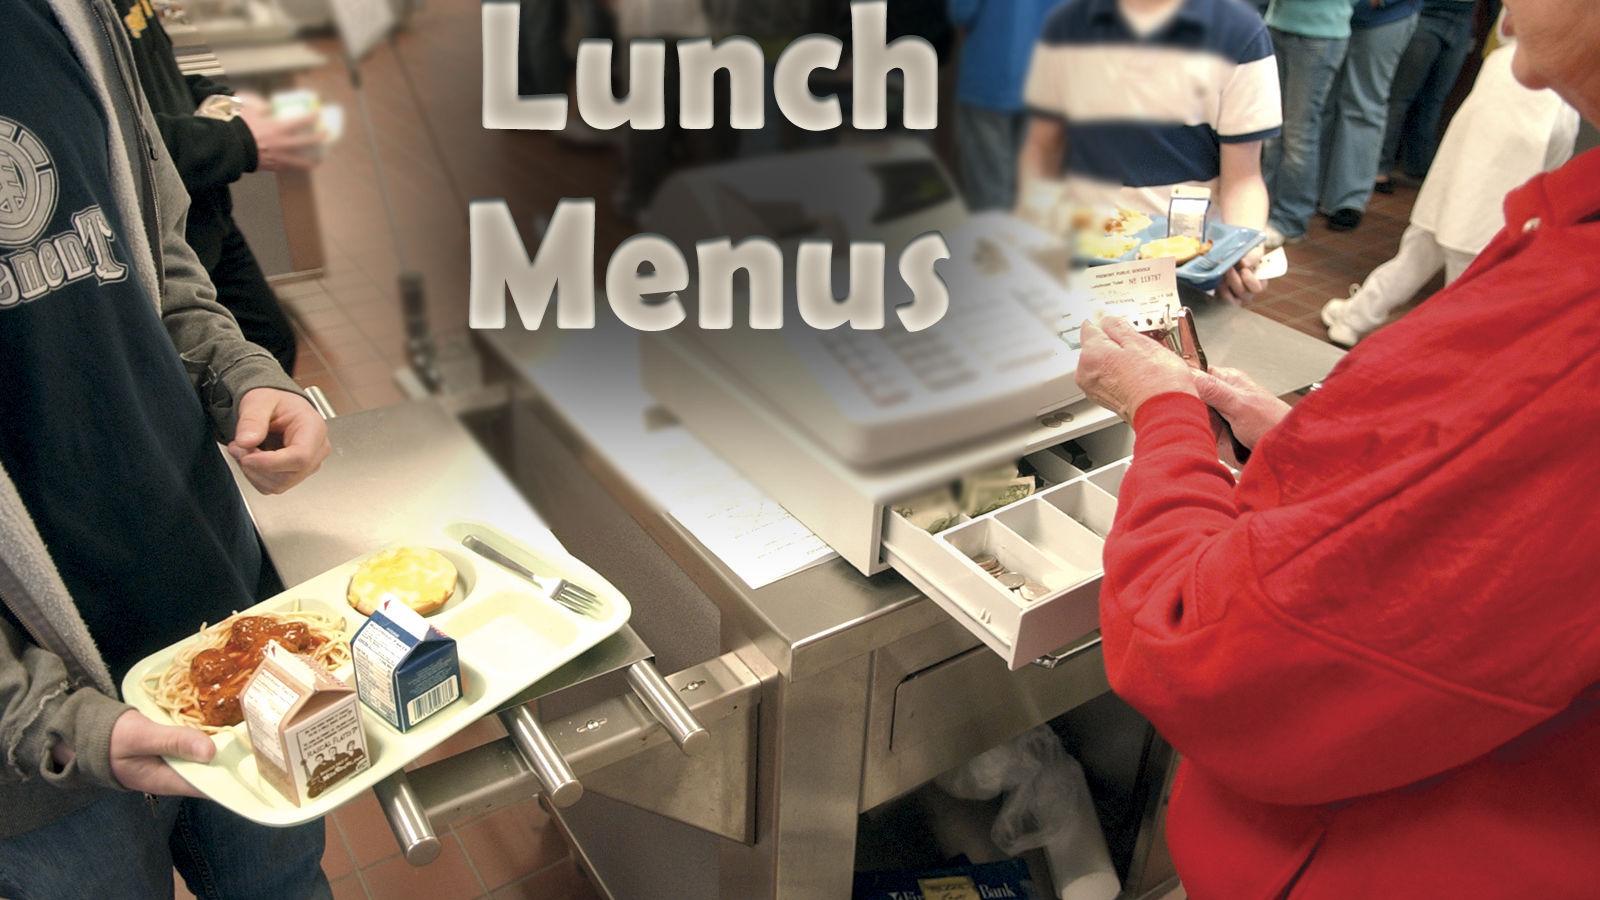 School breakfast and lunch menus for Aug. 14-18